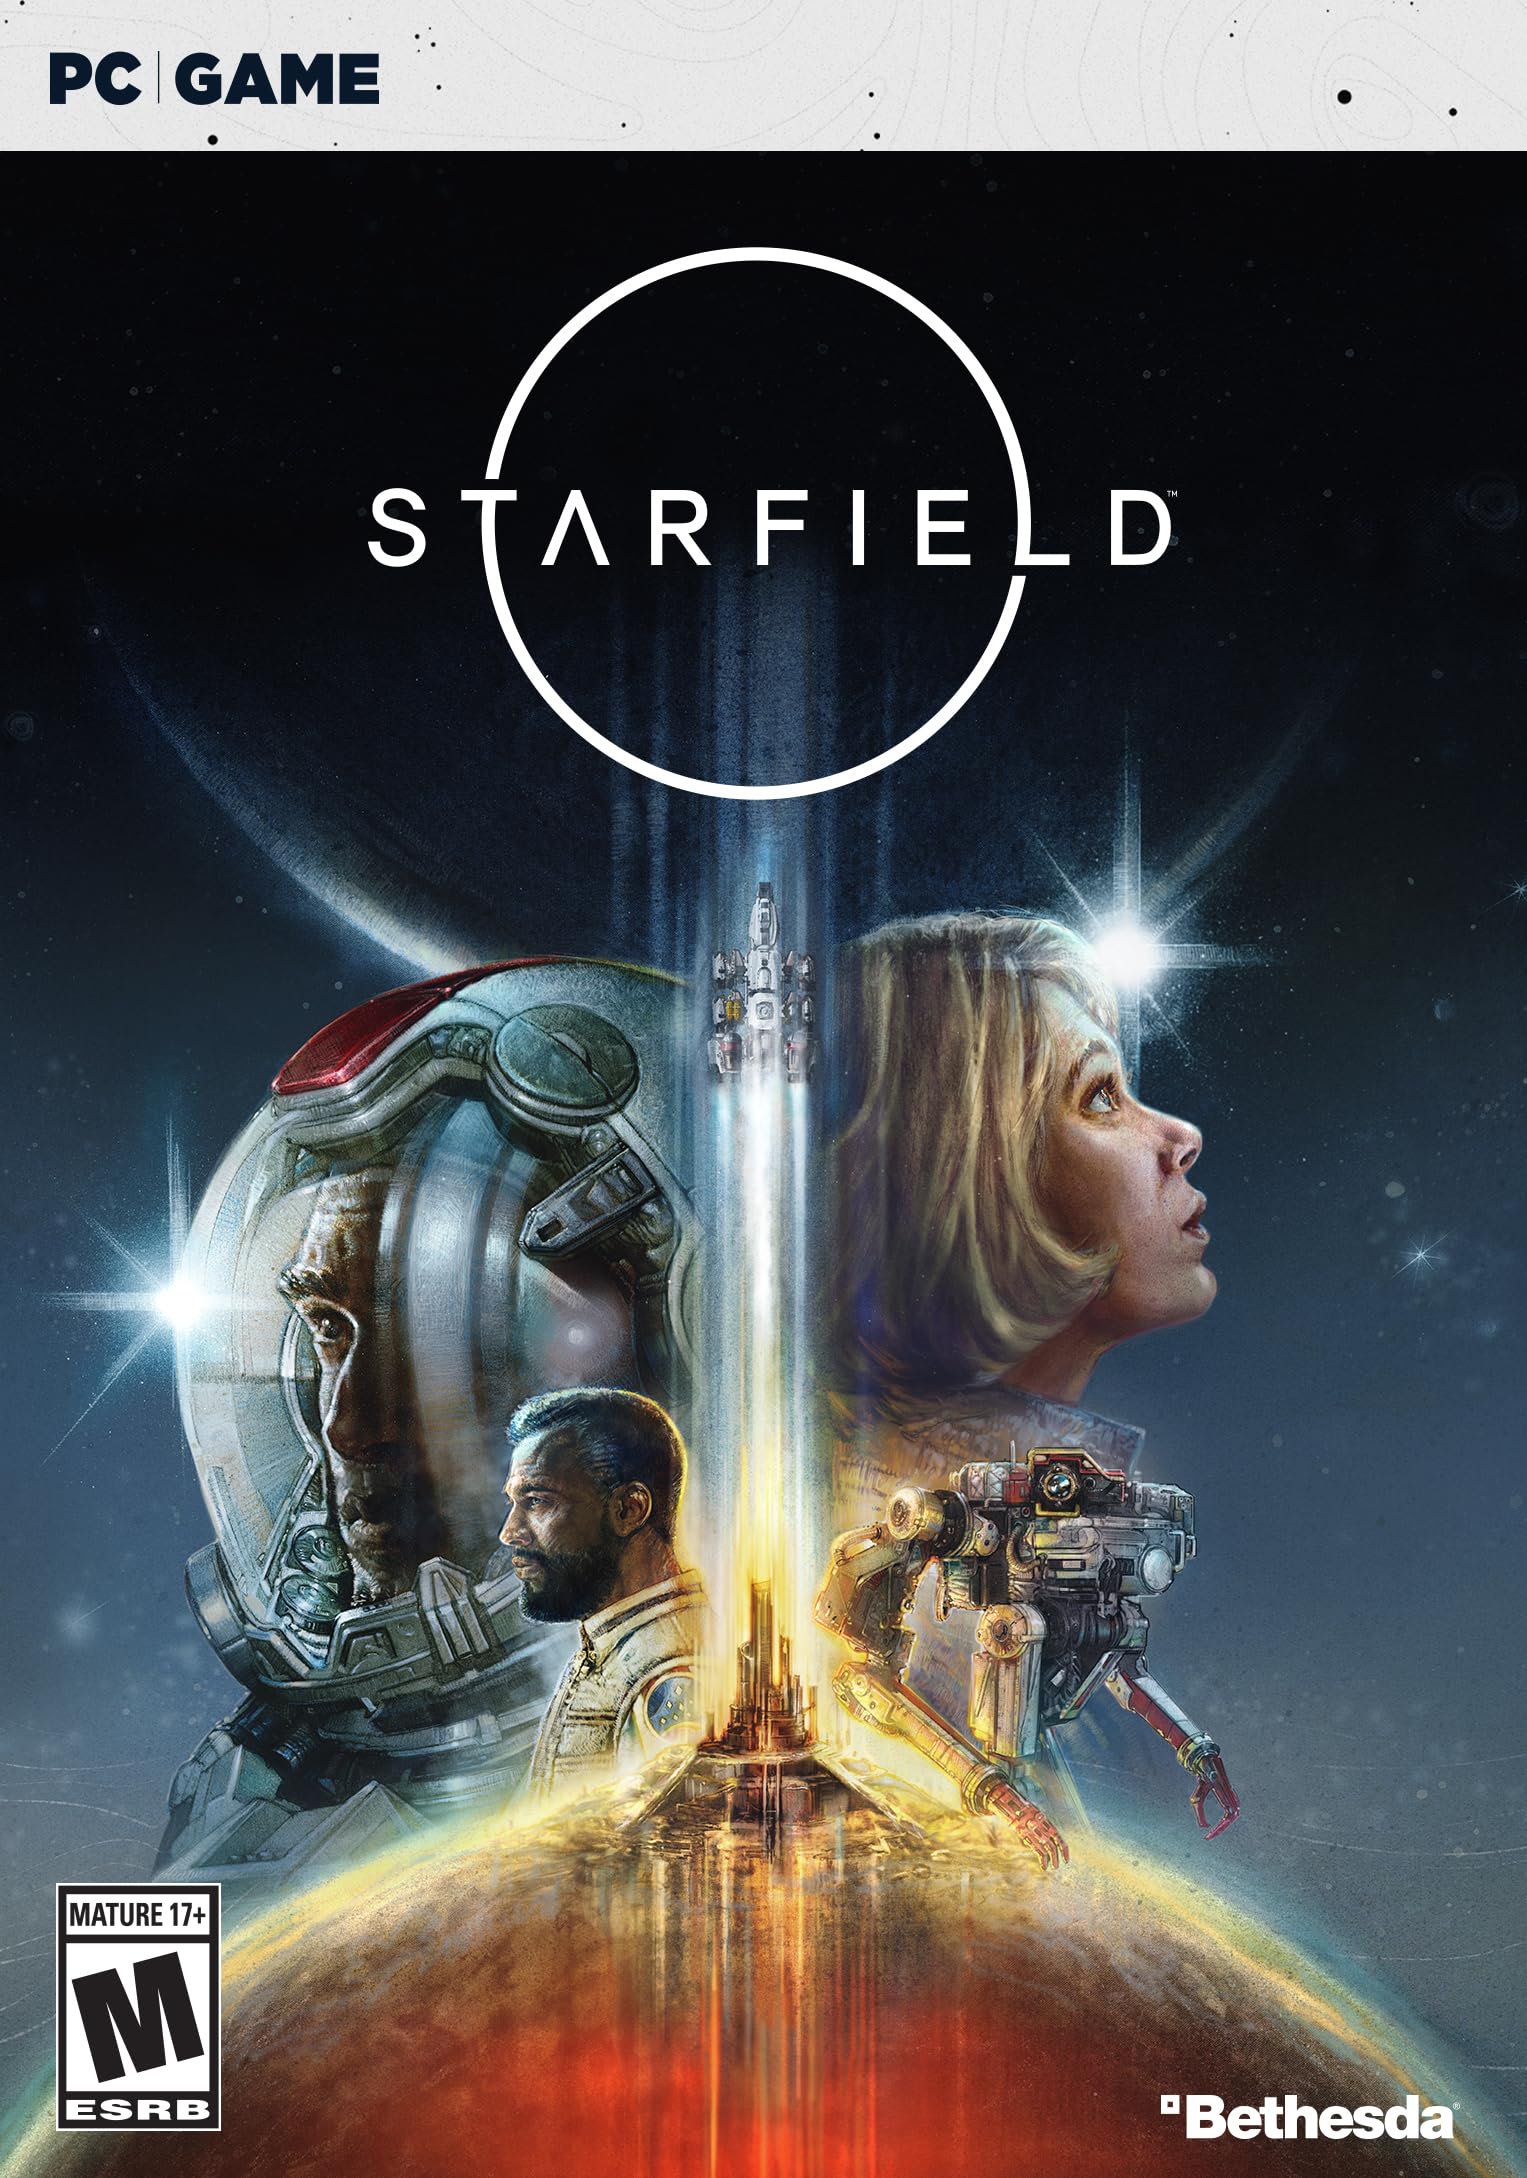 Starfield: Constellation Edition - PC (not playable until 9/1)